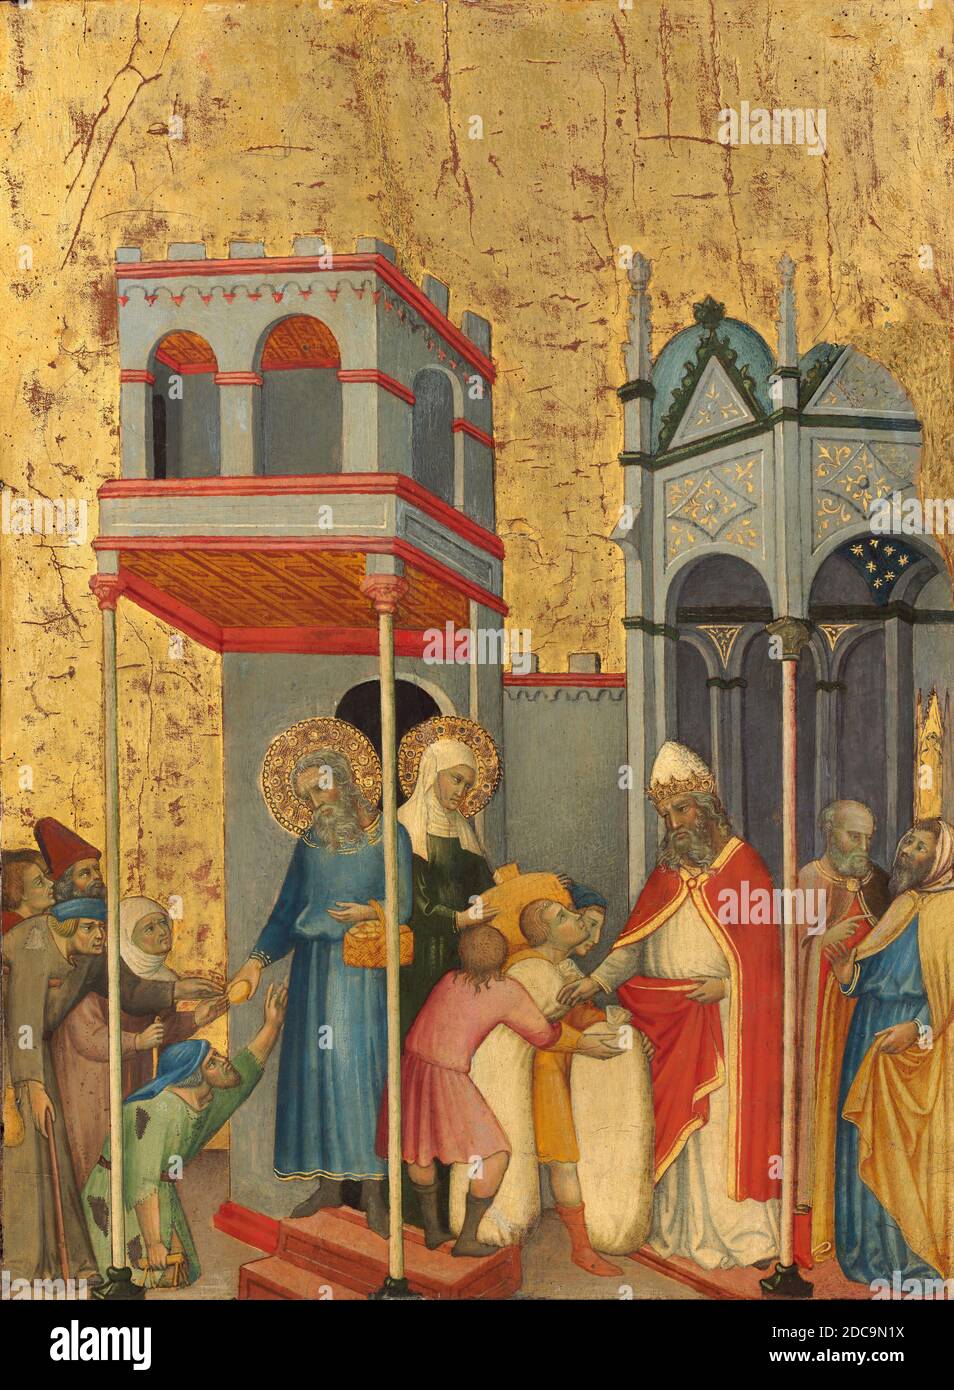 Andrea di Bartolo, (artist), Sienese, active from 1389 - died 1428, Joachim and Anna Giving Food to the Poor and Offerings to the Temple, c. 1400/1405, tempera on poplar panel, painted surface: 44.1 × 32.5 cm (17 3/8 × 12 13/16 in.), overall: 45.7 × 34 × 0.6 cm (18 × 13 3/8 × 1/4 in.), framed: 48.3 x 36.8 x 4.1 cm (19 x 14 1/2 x 1 5/8 in Stock Photo